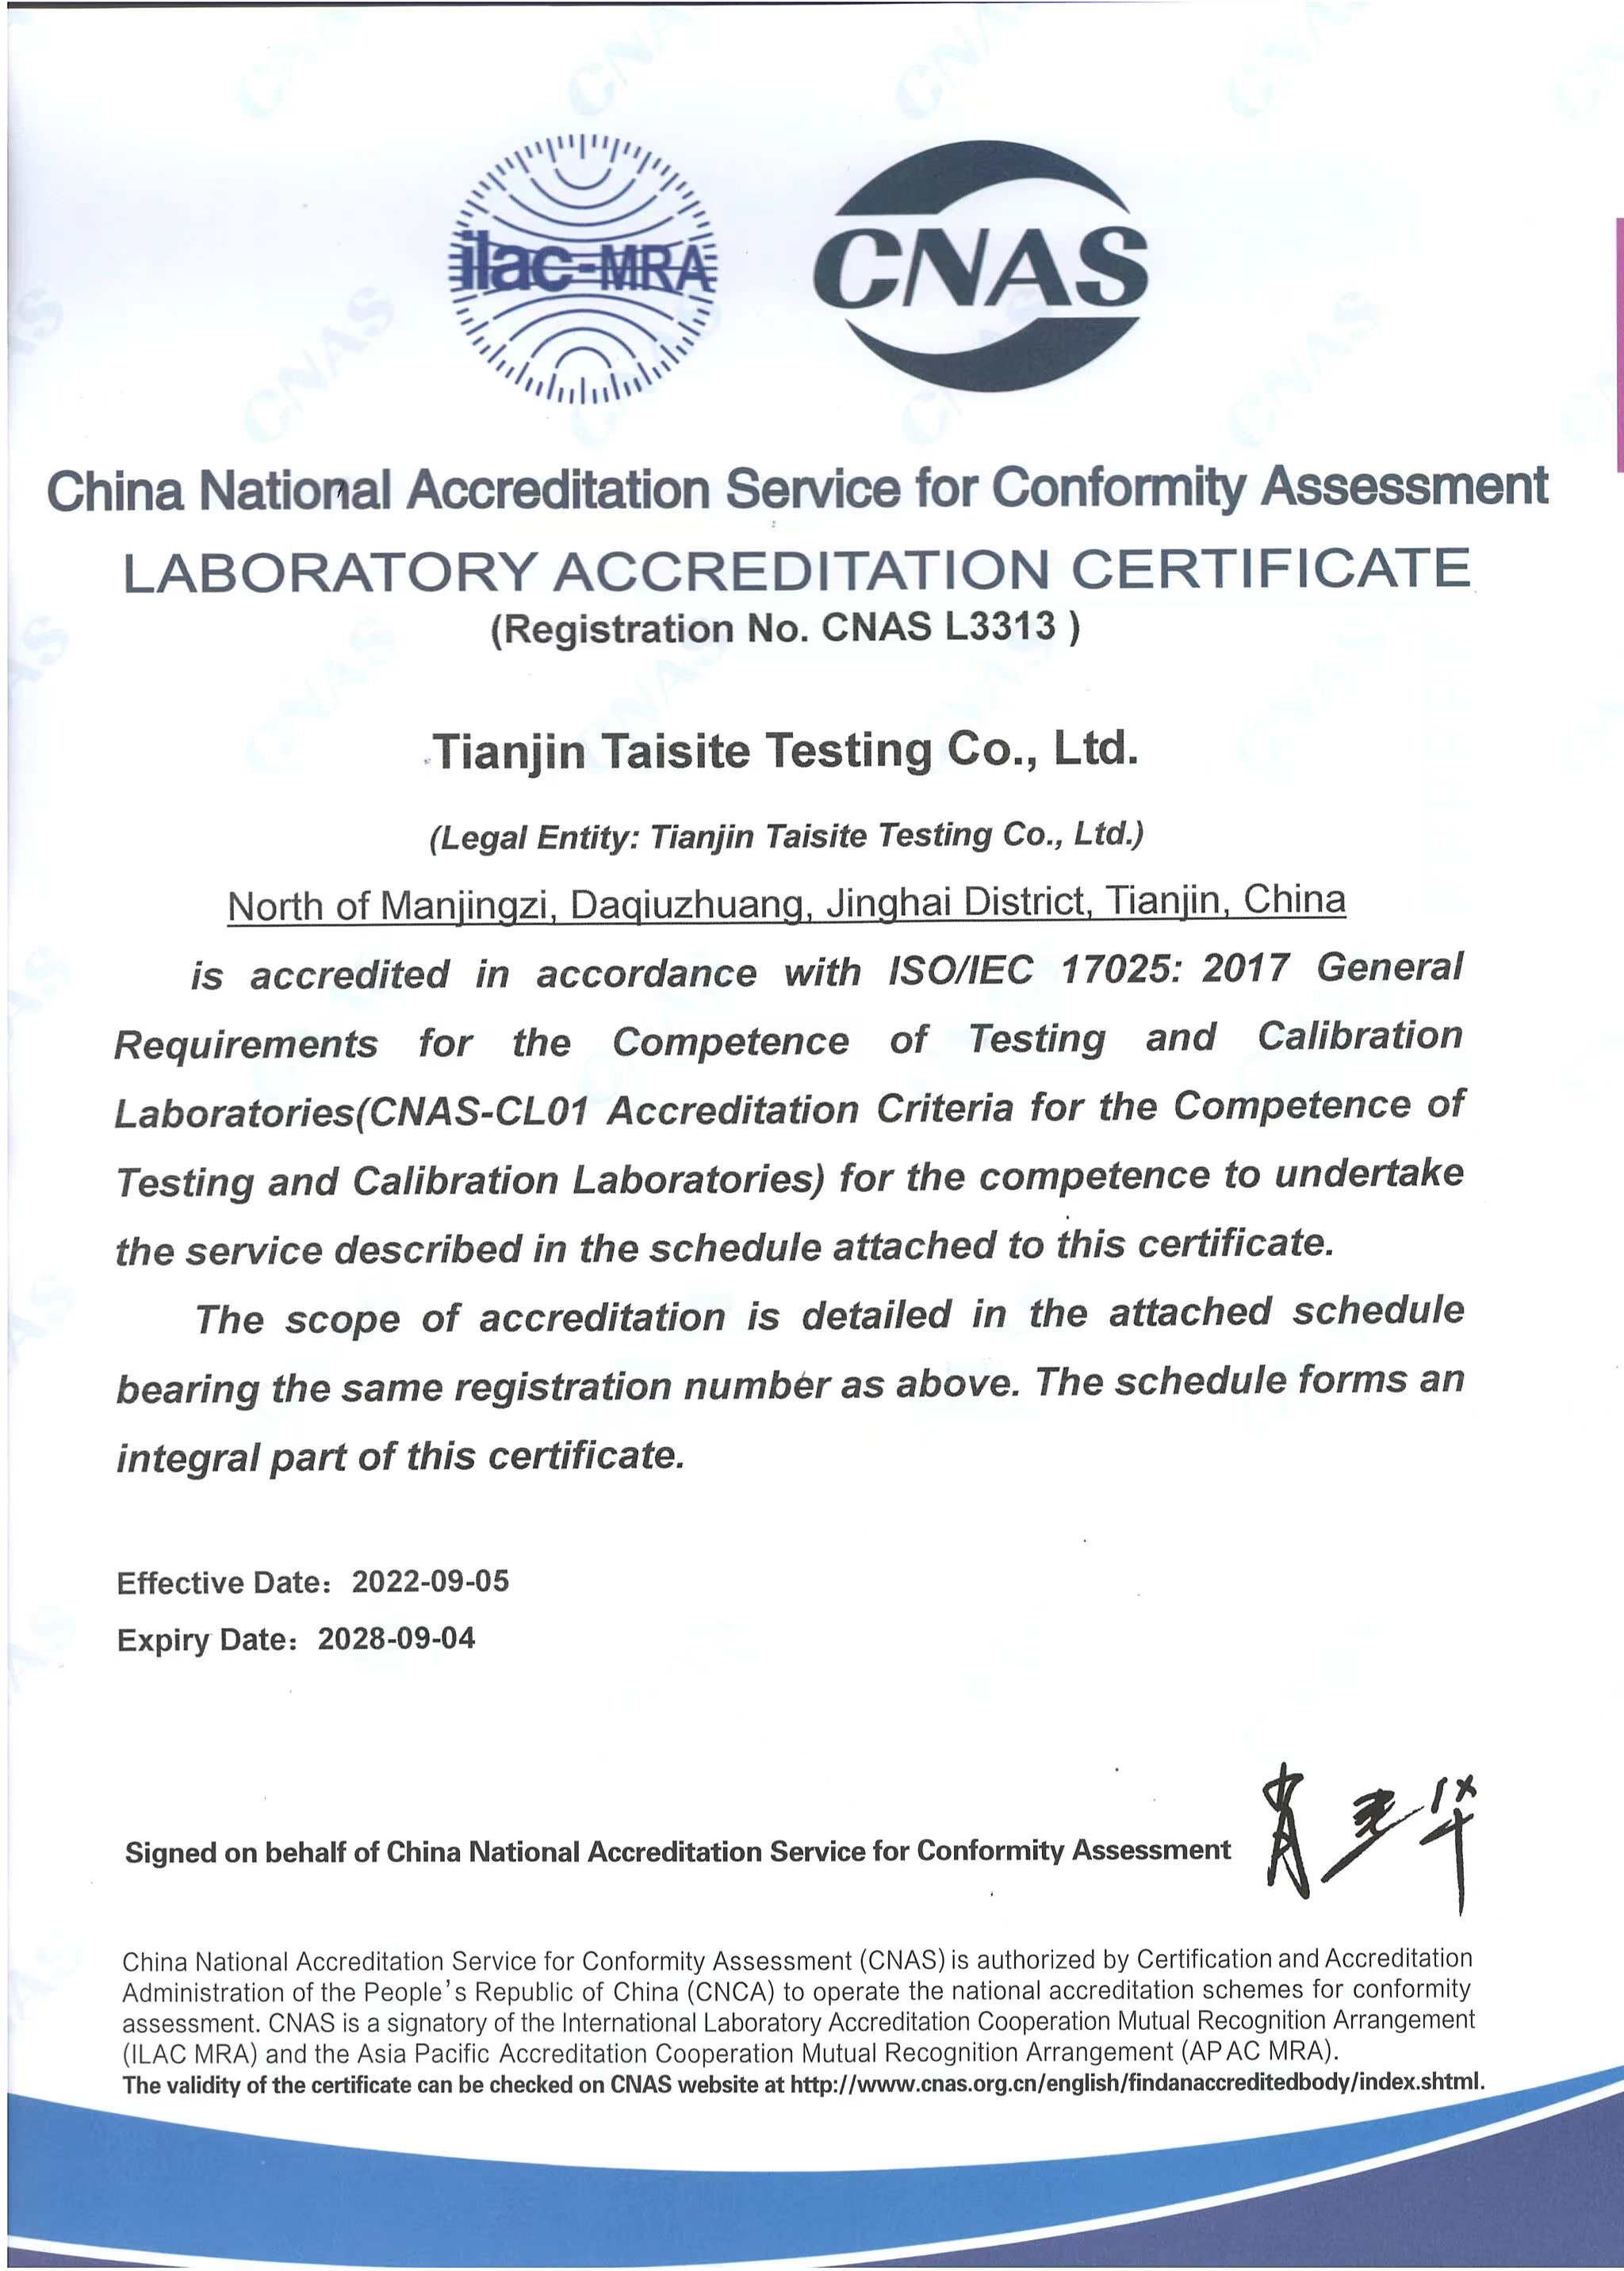 CNAS-Certificate-for-Tianjin-Lab